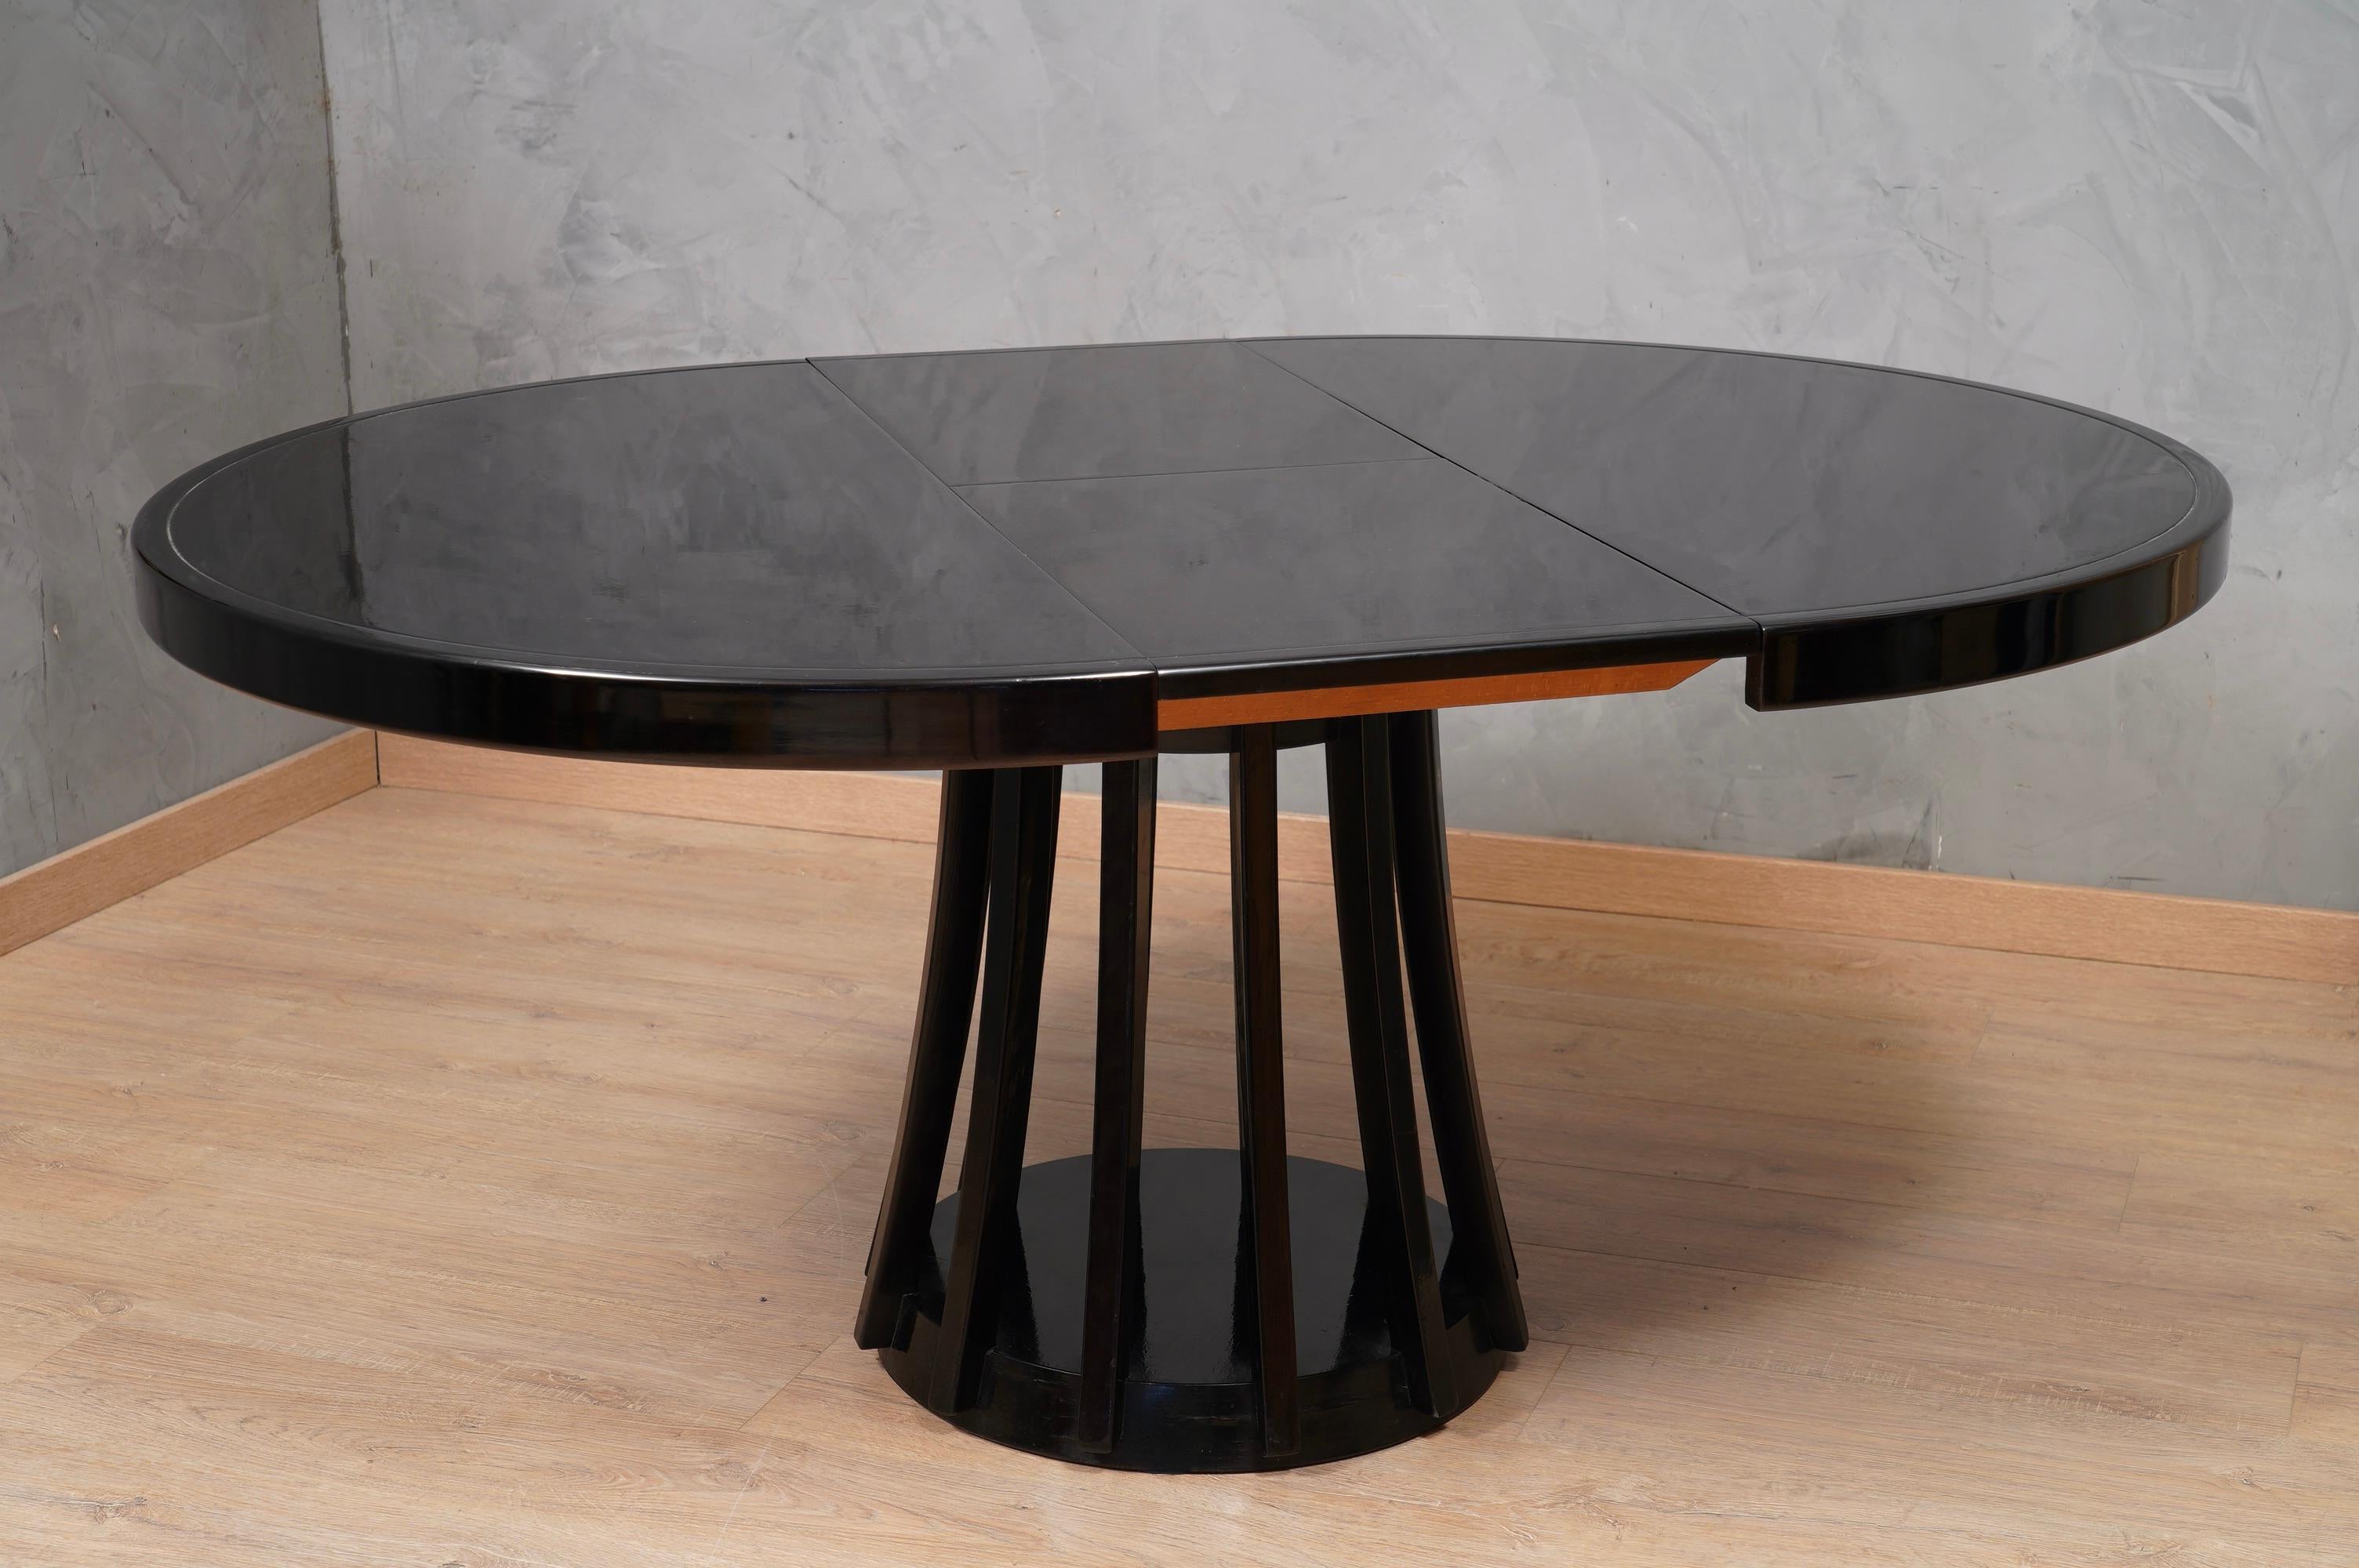 Mangiarotti Angelo Round Black Wood Dinning Table, 1970 In Good Condition For Sale In Rome, IT